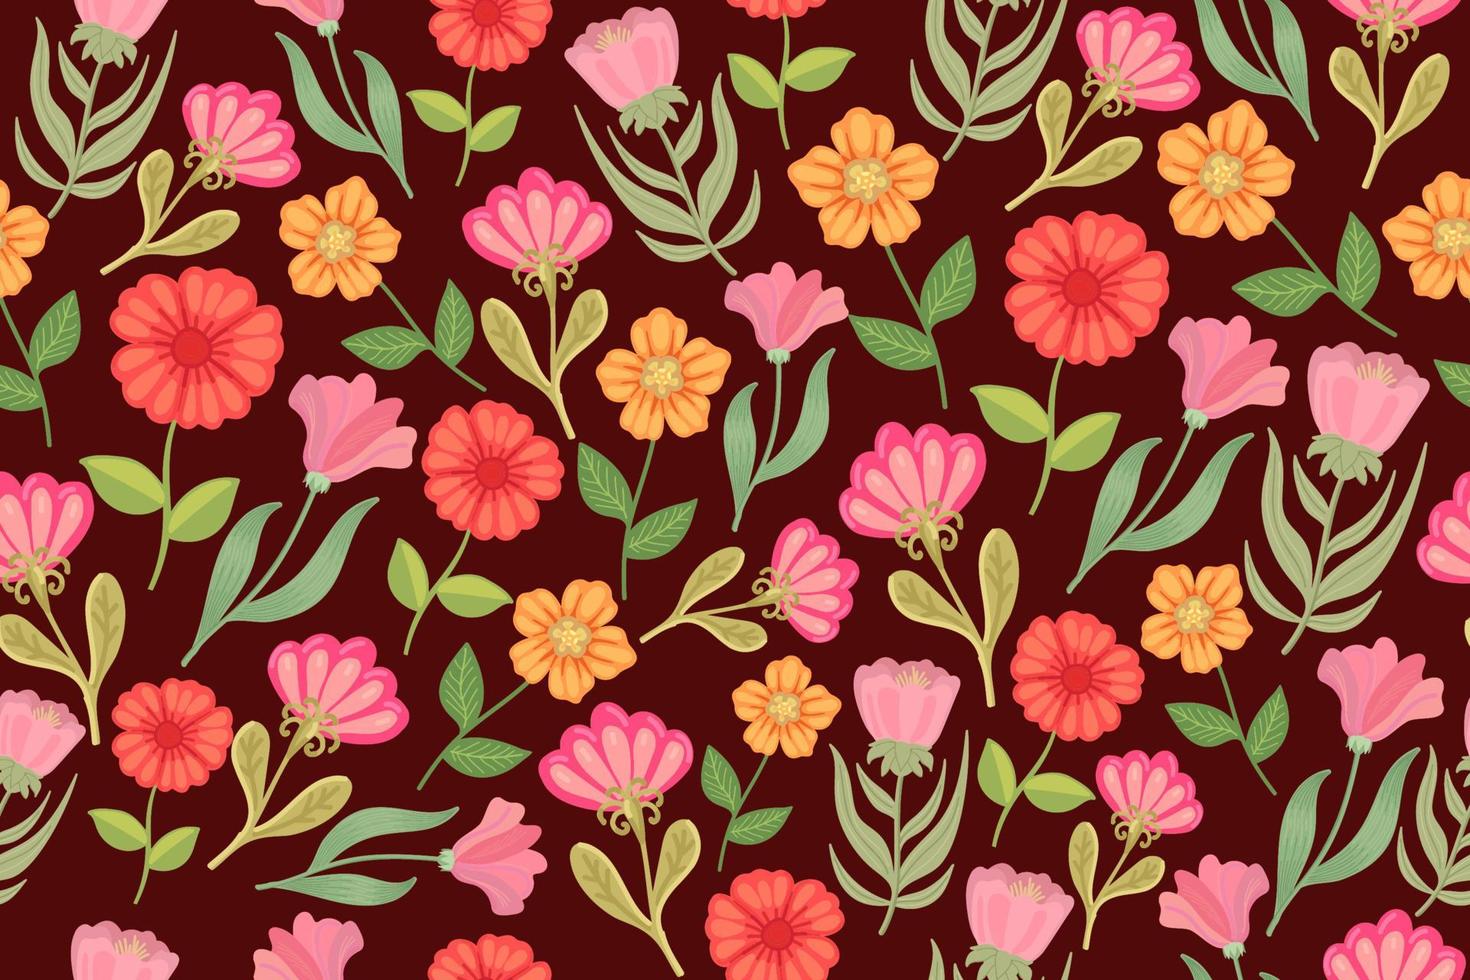 Seamless floral pattern. Seamless pattern with colorful flowers for your design projects as textile, wrapping paper, invitations, clothes and others. vector